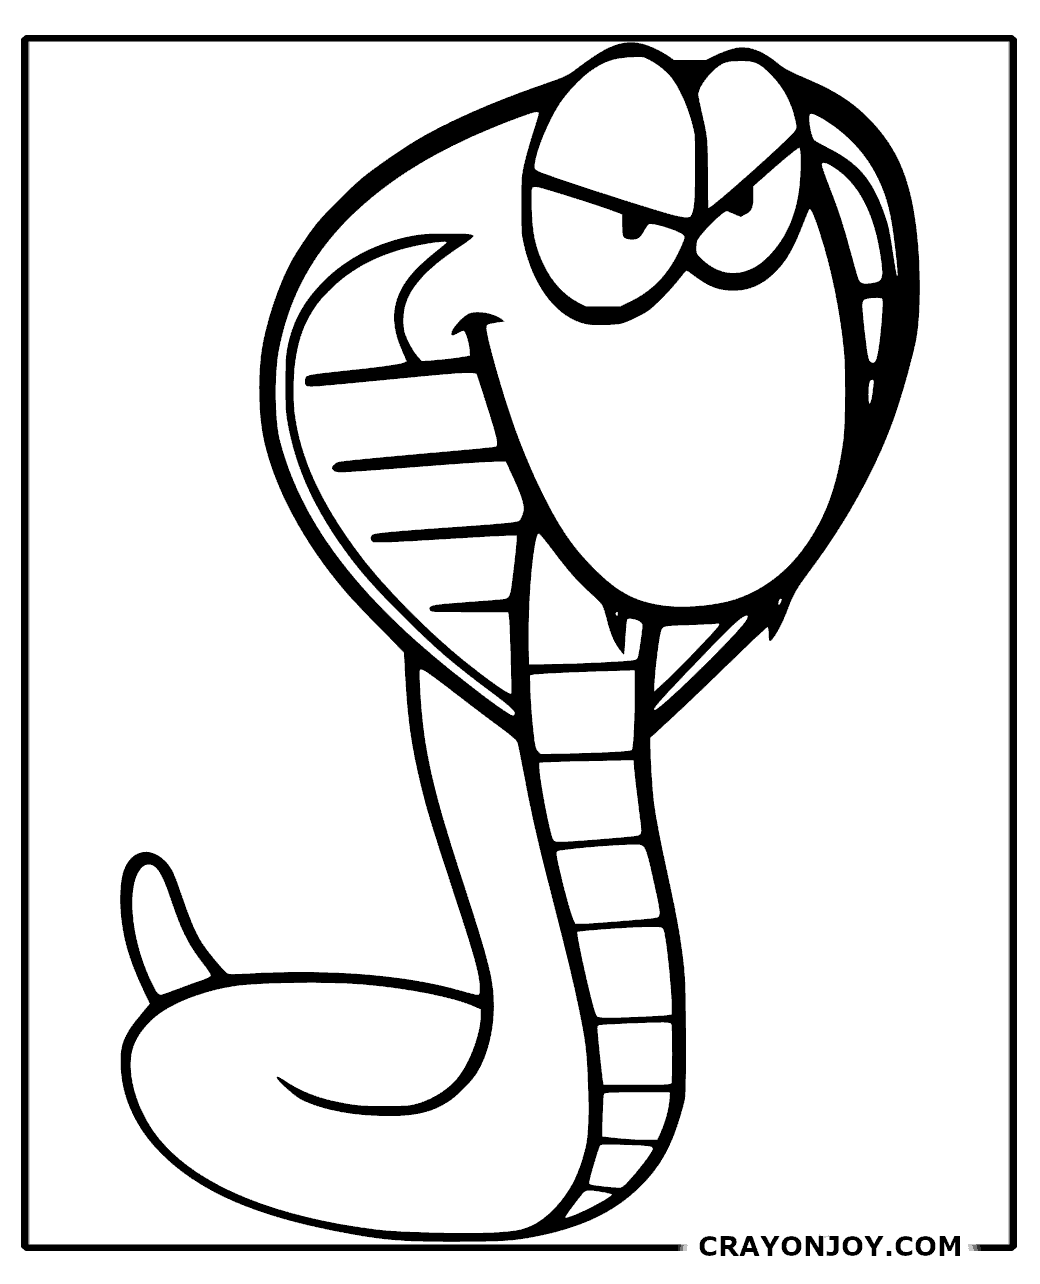 Cobra Coloring Pages: Free Printable Sheets for Kids and Adults